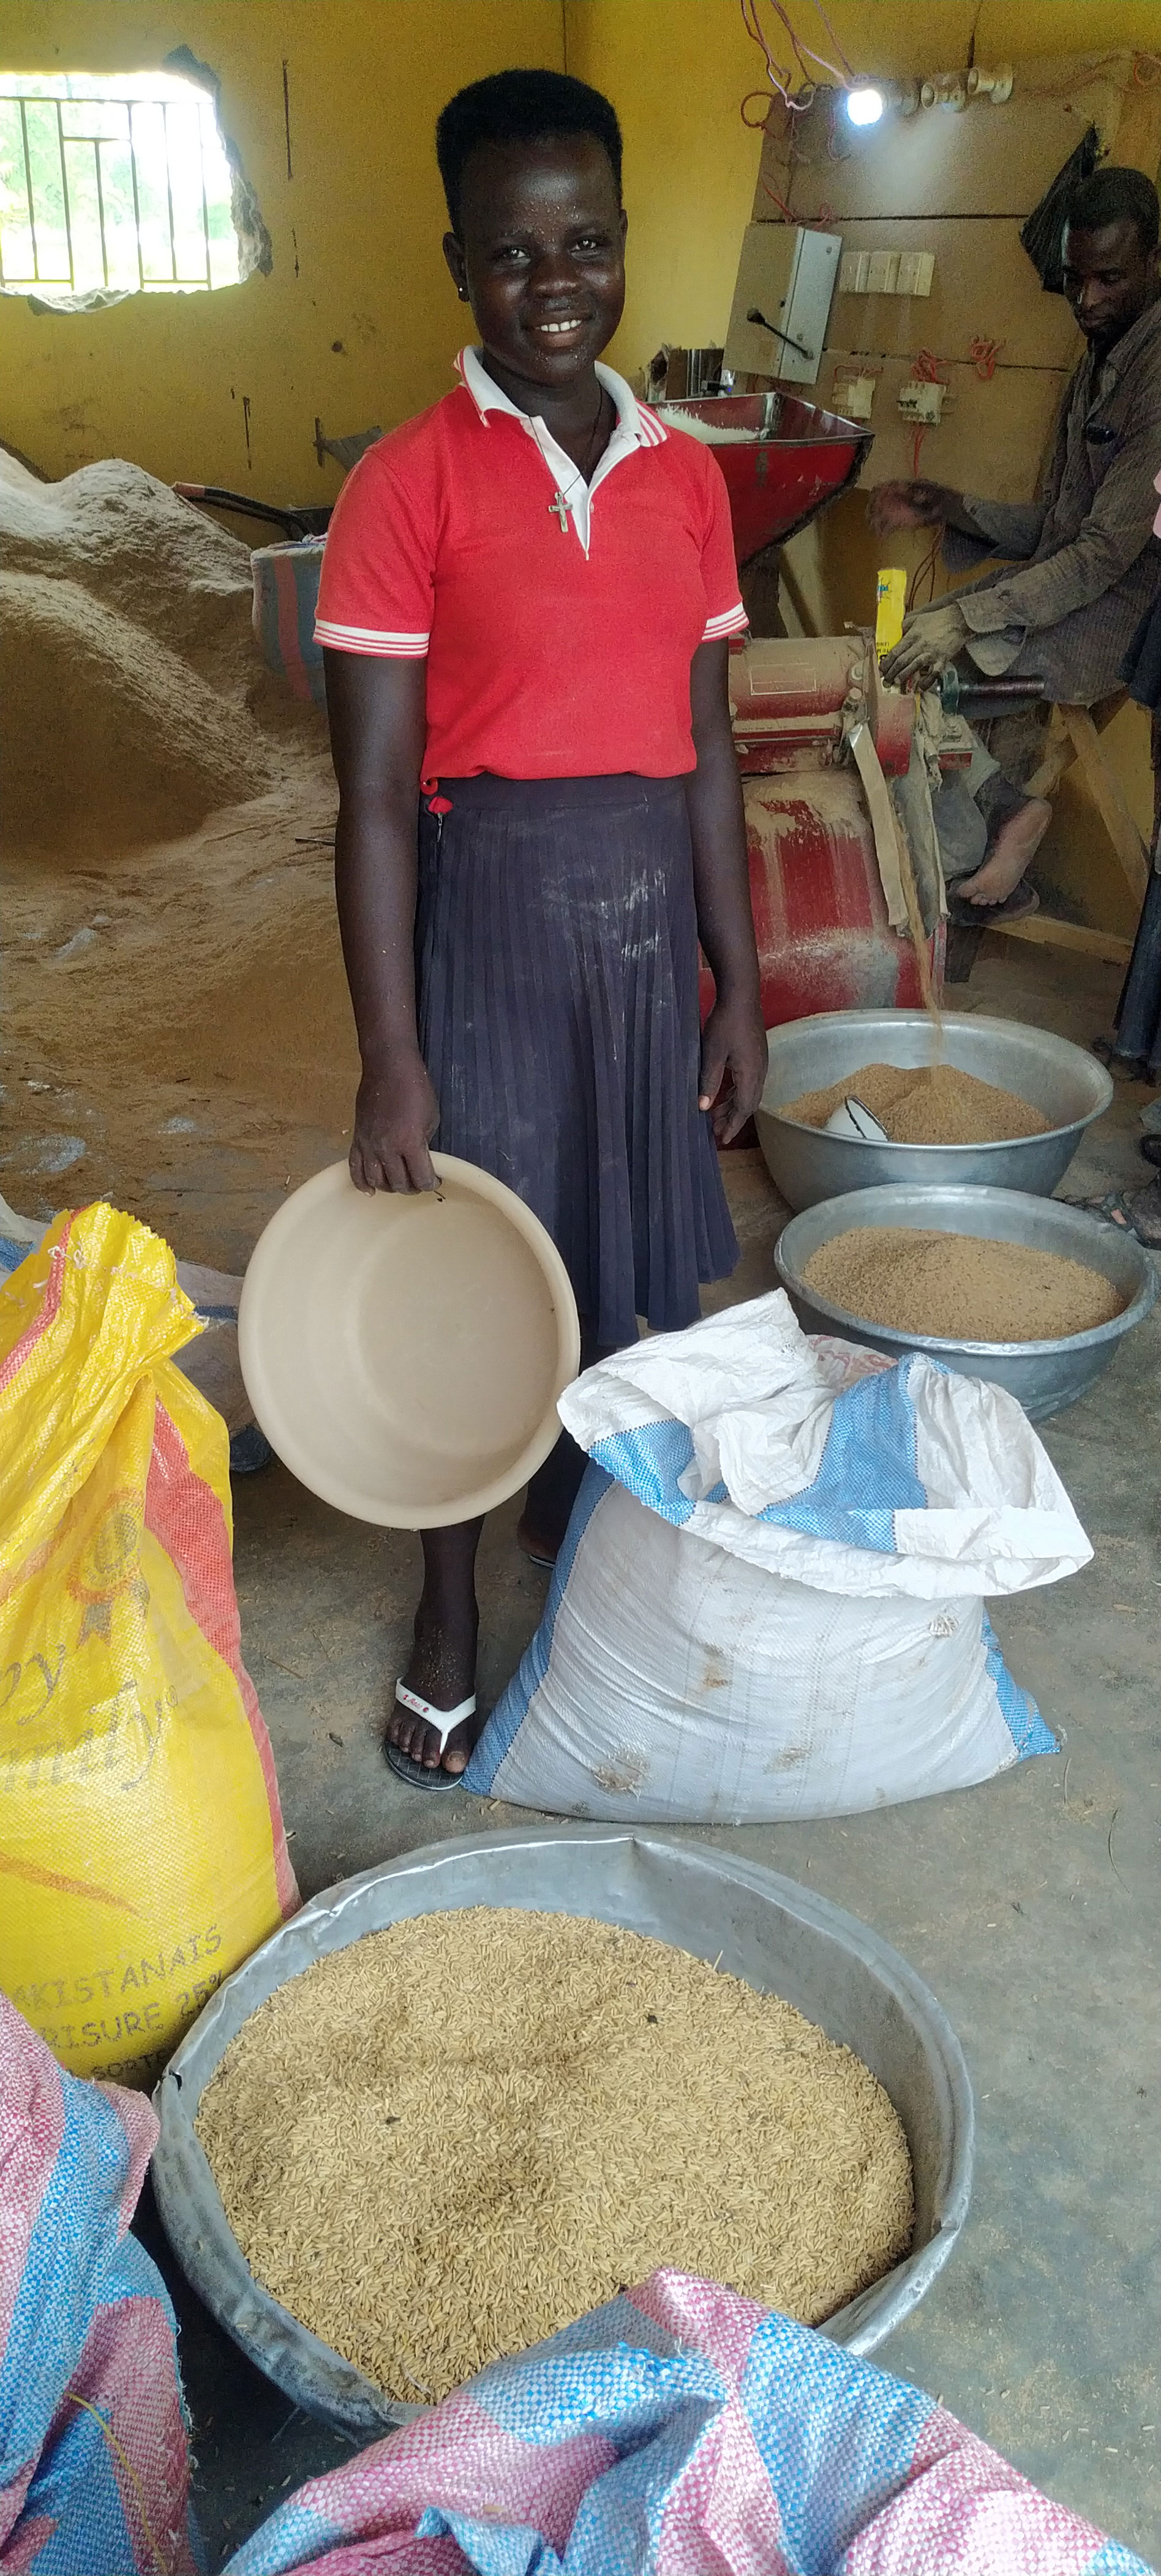 A high school student brings her family's rice to be milled.